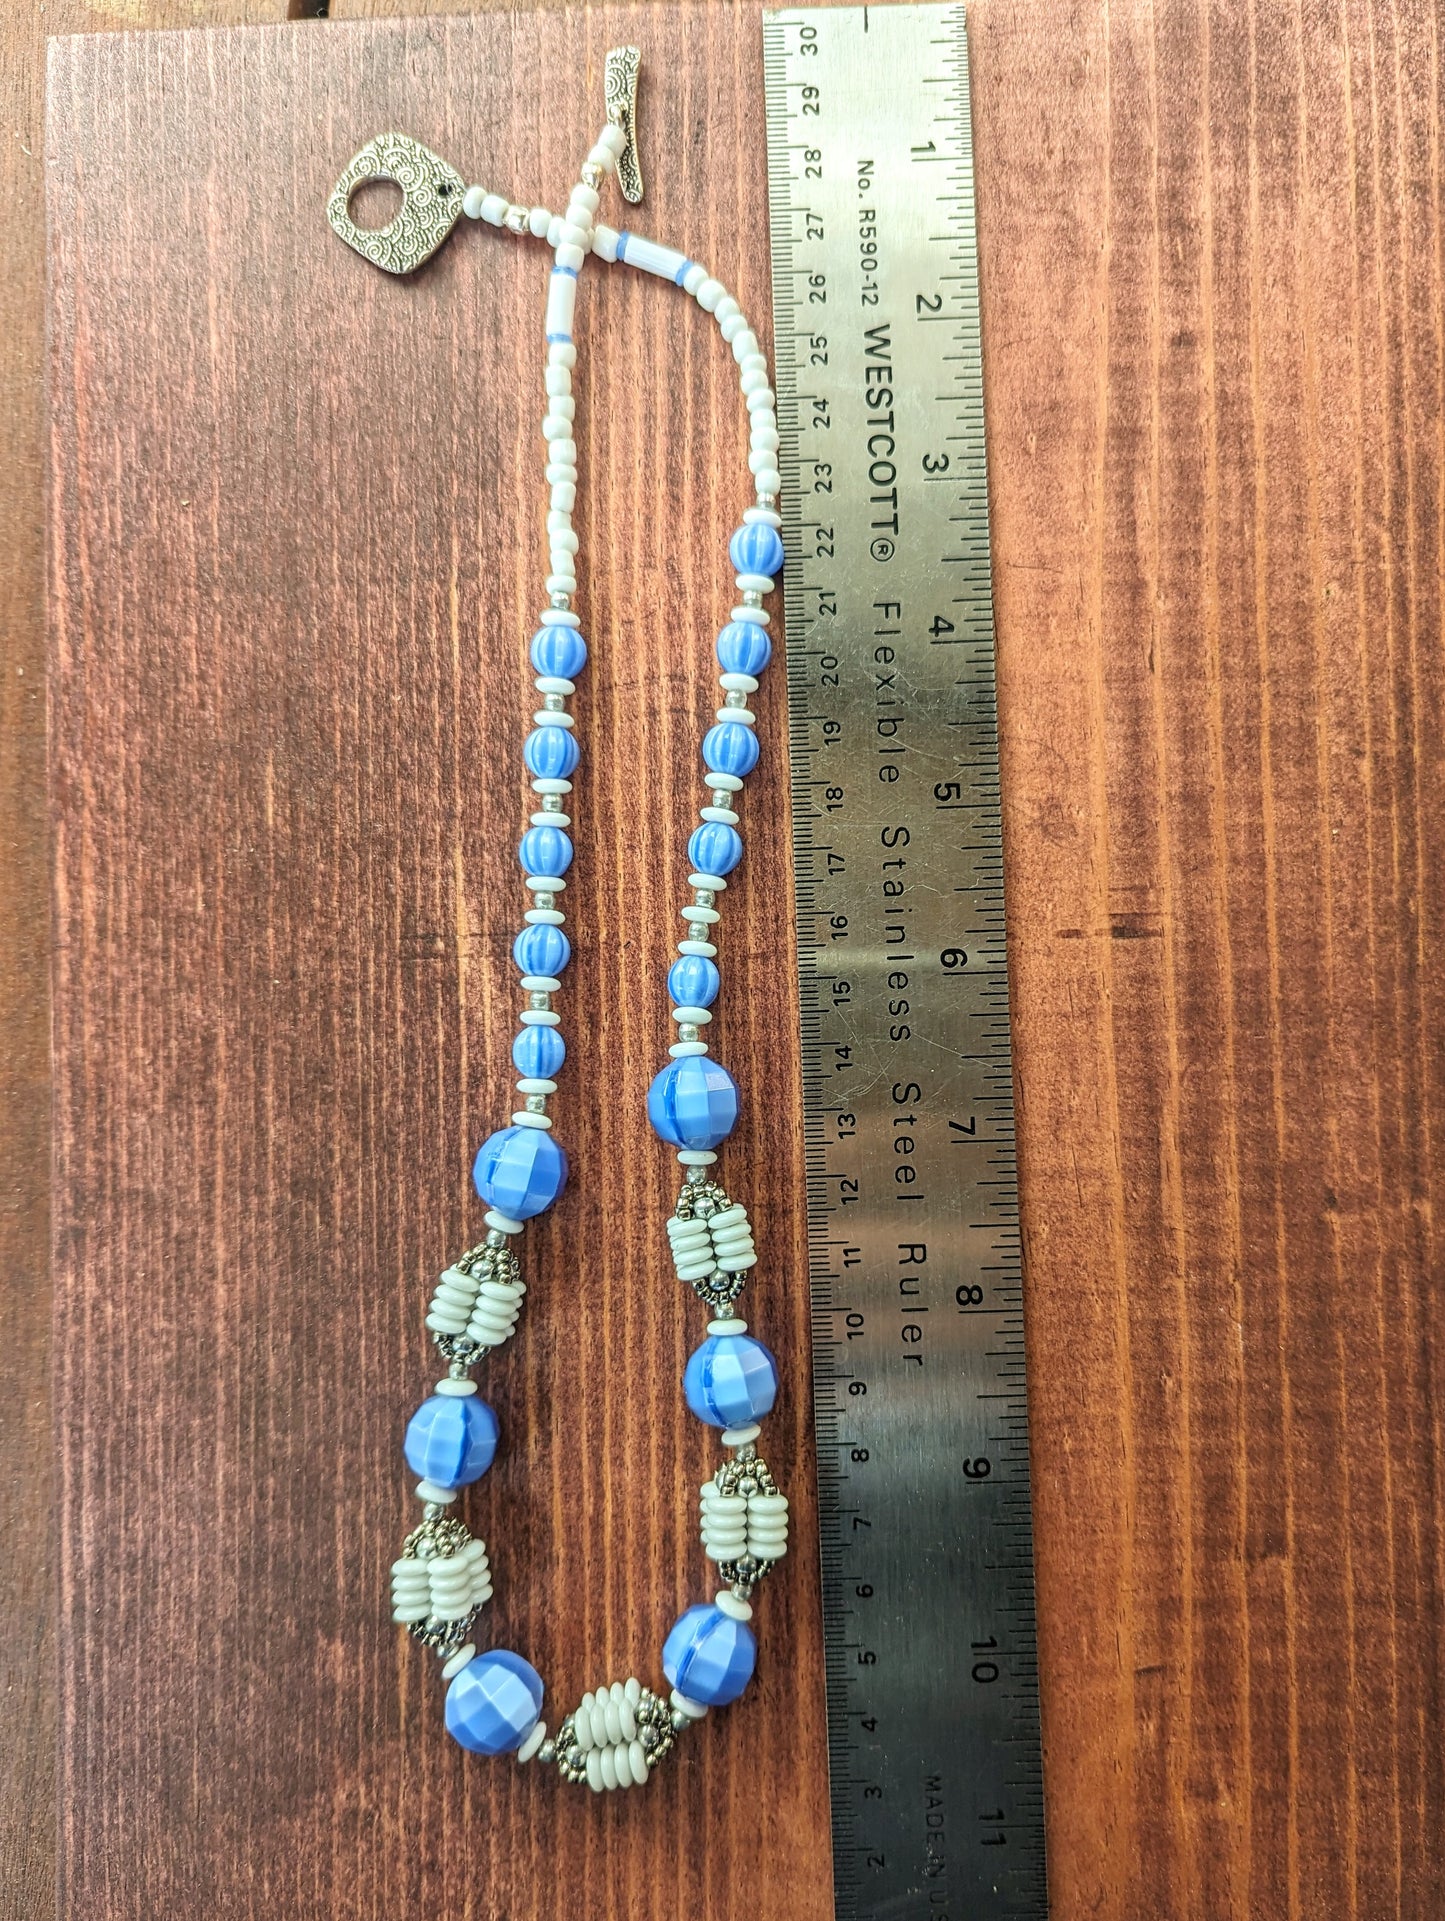 A blue, white and silver necklace is alongside a metal ruler, atop a reddish wood board. The necklace has white beads and a silver toggle clasp at the back and then graduated blue beads leading to an alternating pattern of large blue beads and beaded beads that are comprised of four columns of white discs capped by silver beads.